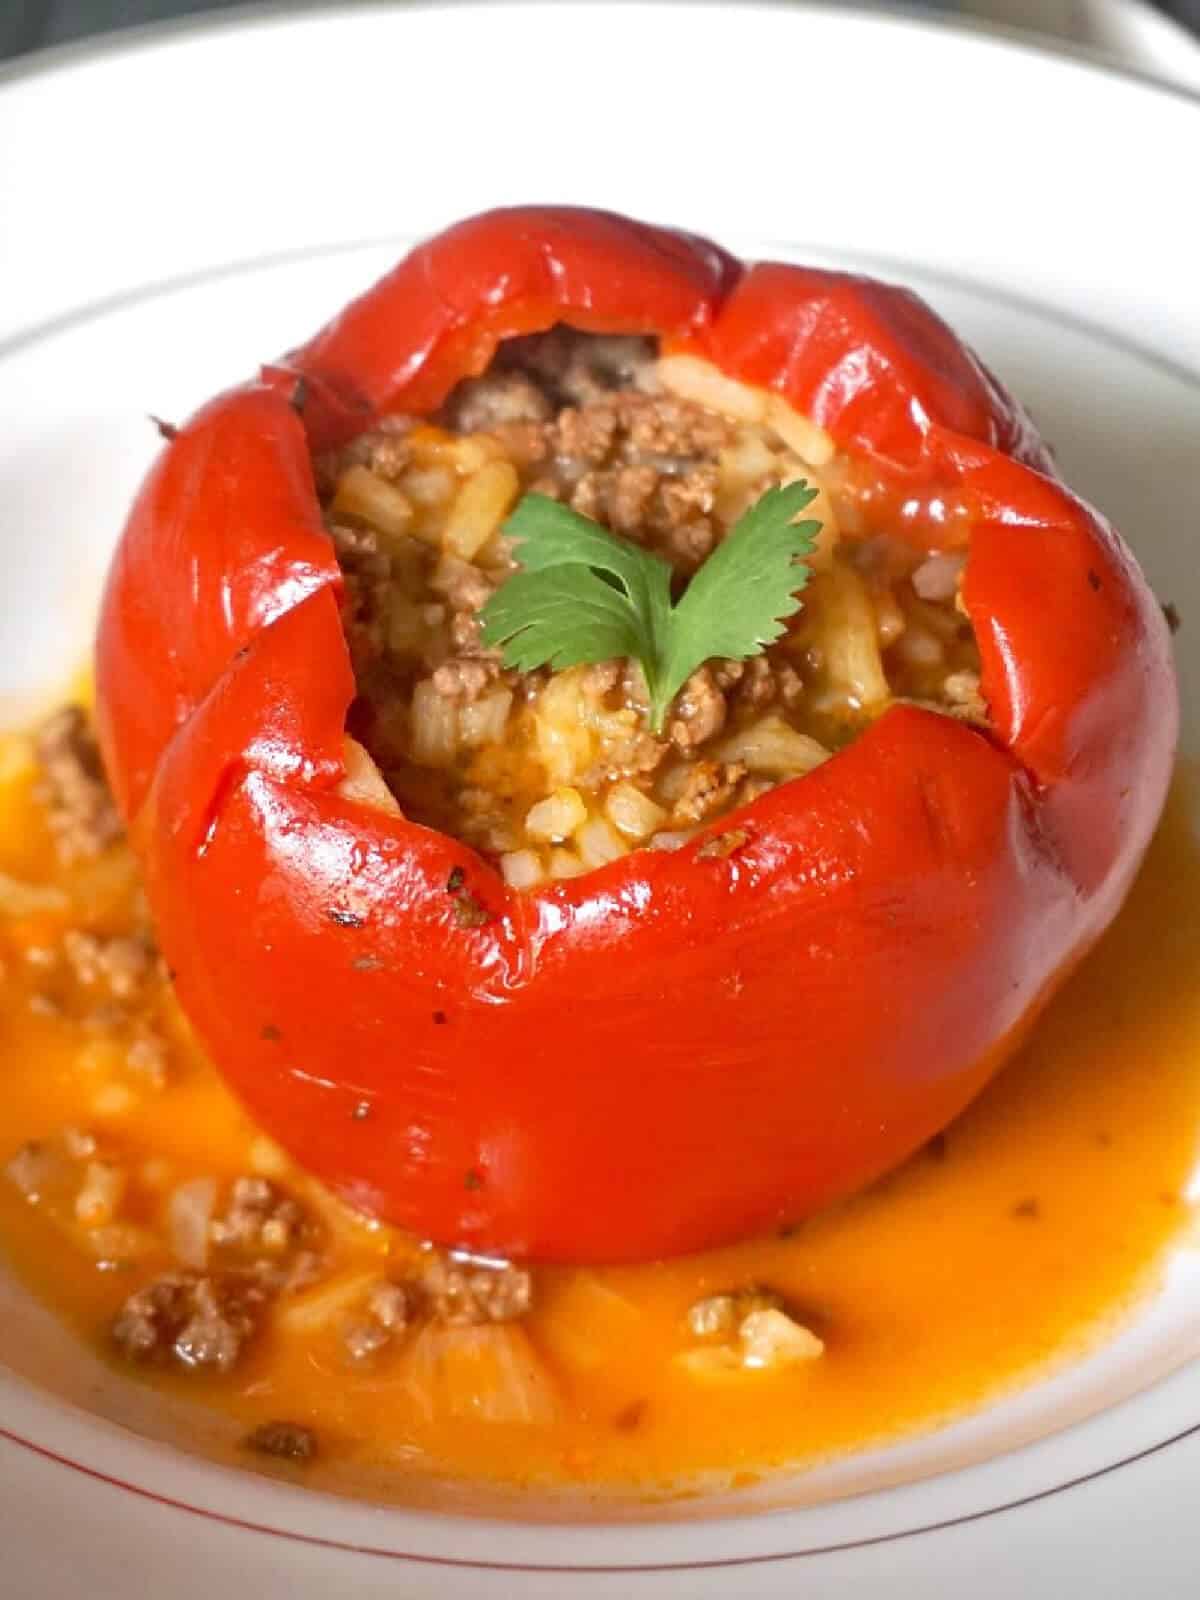 A stuffed pepper with rice and ground beef.